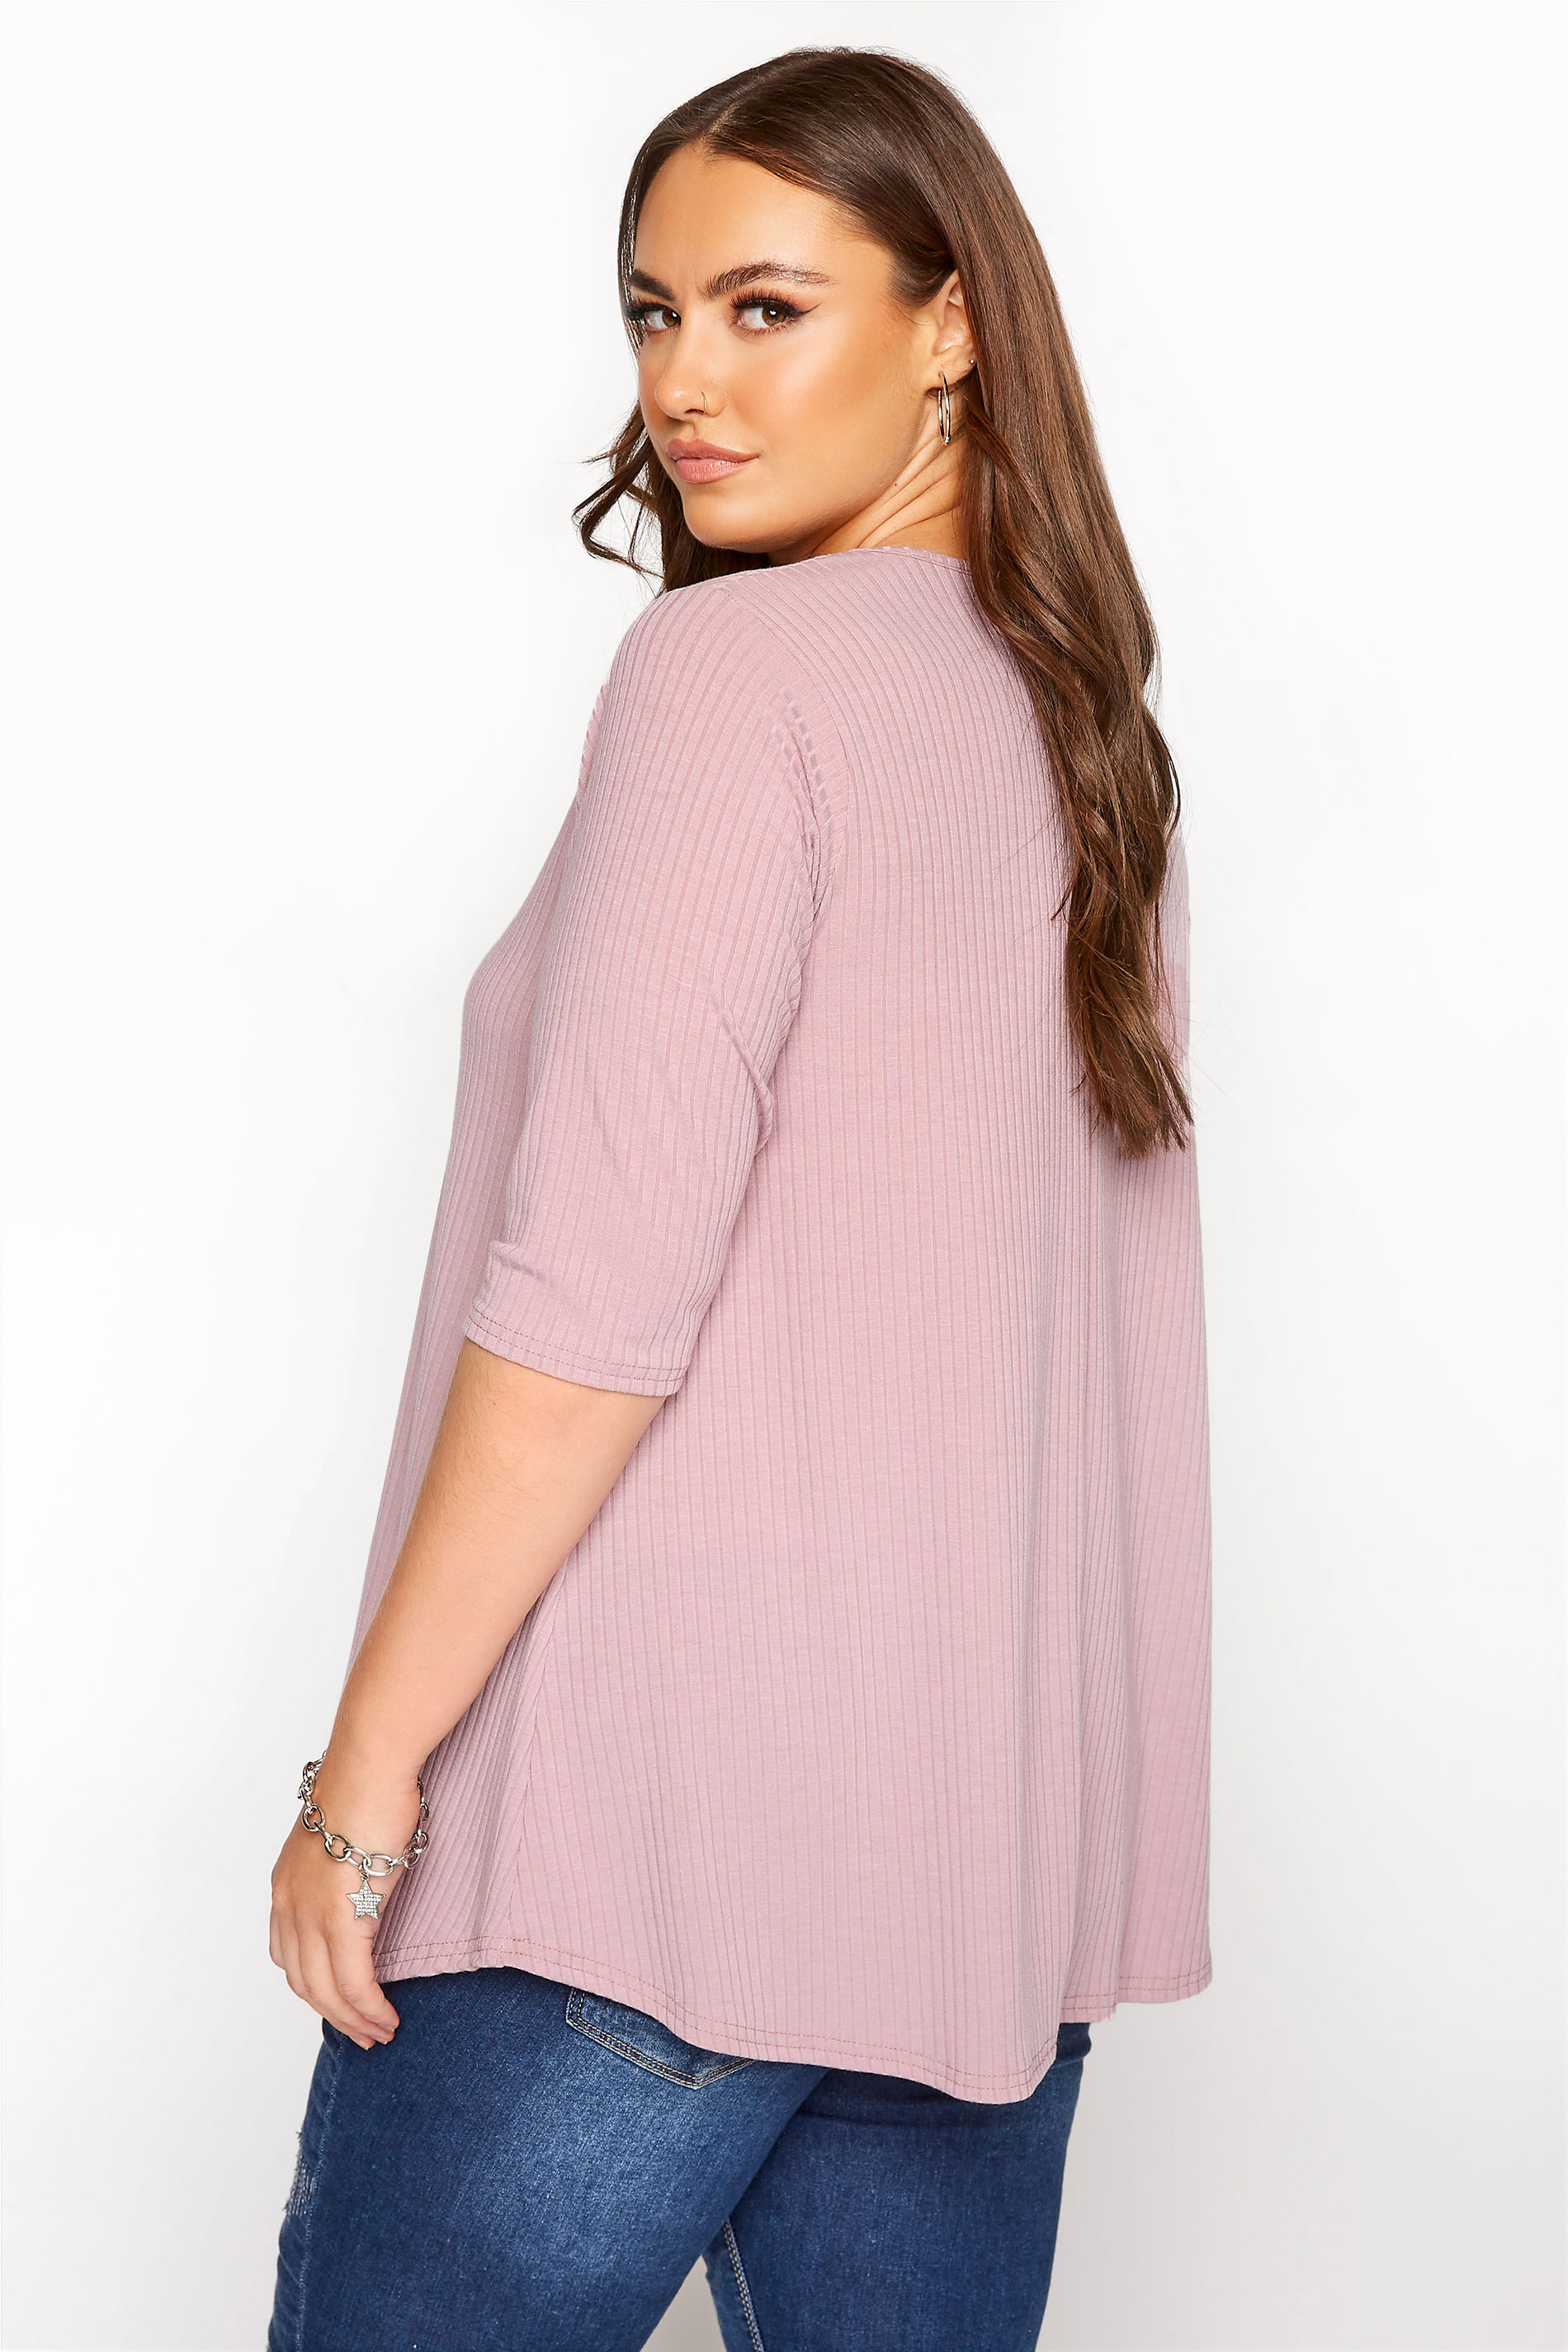 LIMITED COLLECTION Mauve Purple Ribbed Swing 3/4 Length Top | Yours